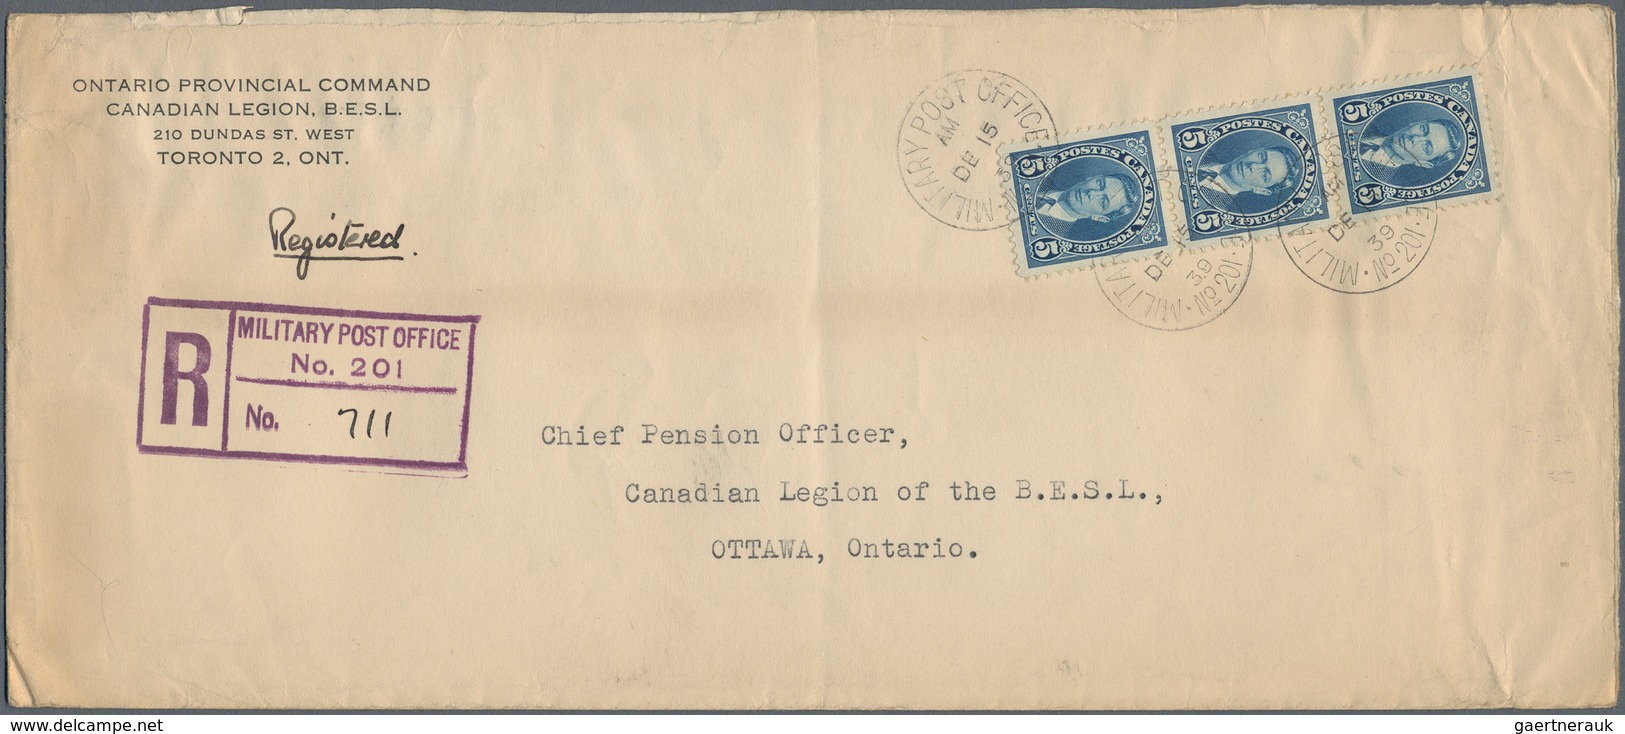 Kanada: 1941/45 Ca. 290 Letters, Cards And Covers, Fieldpost Incl. Canadian Forces Abroad, Service L - Sammlungen